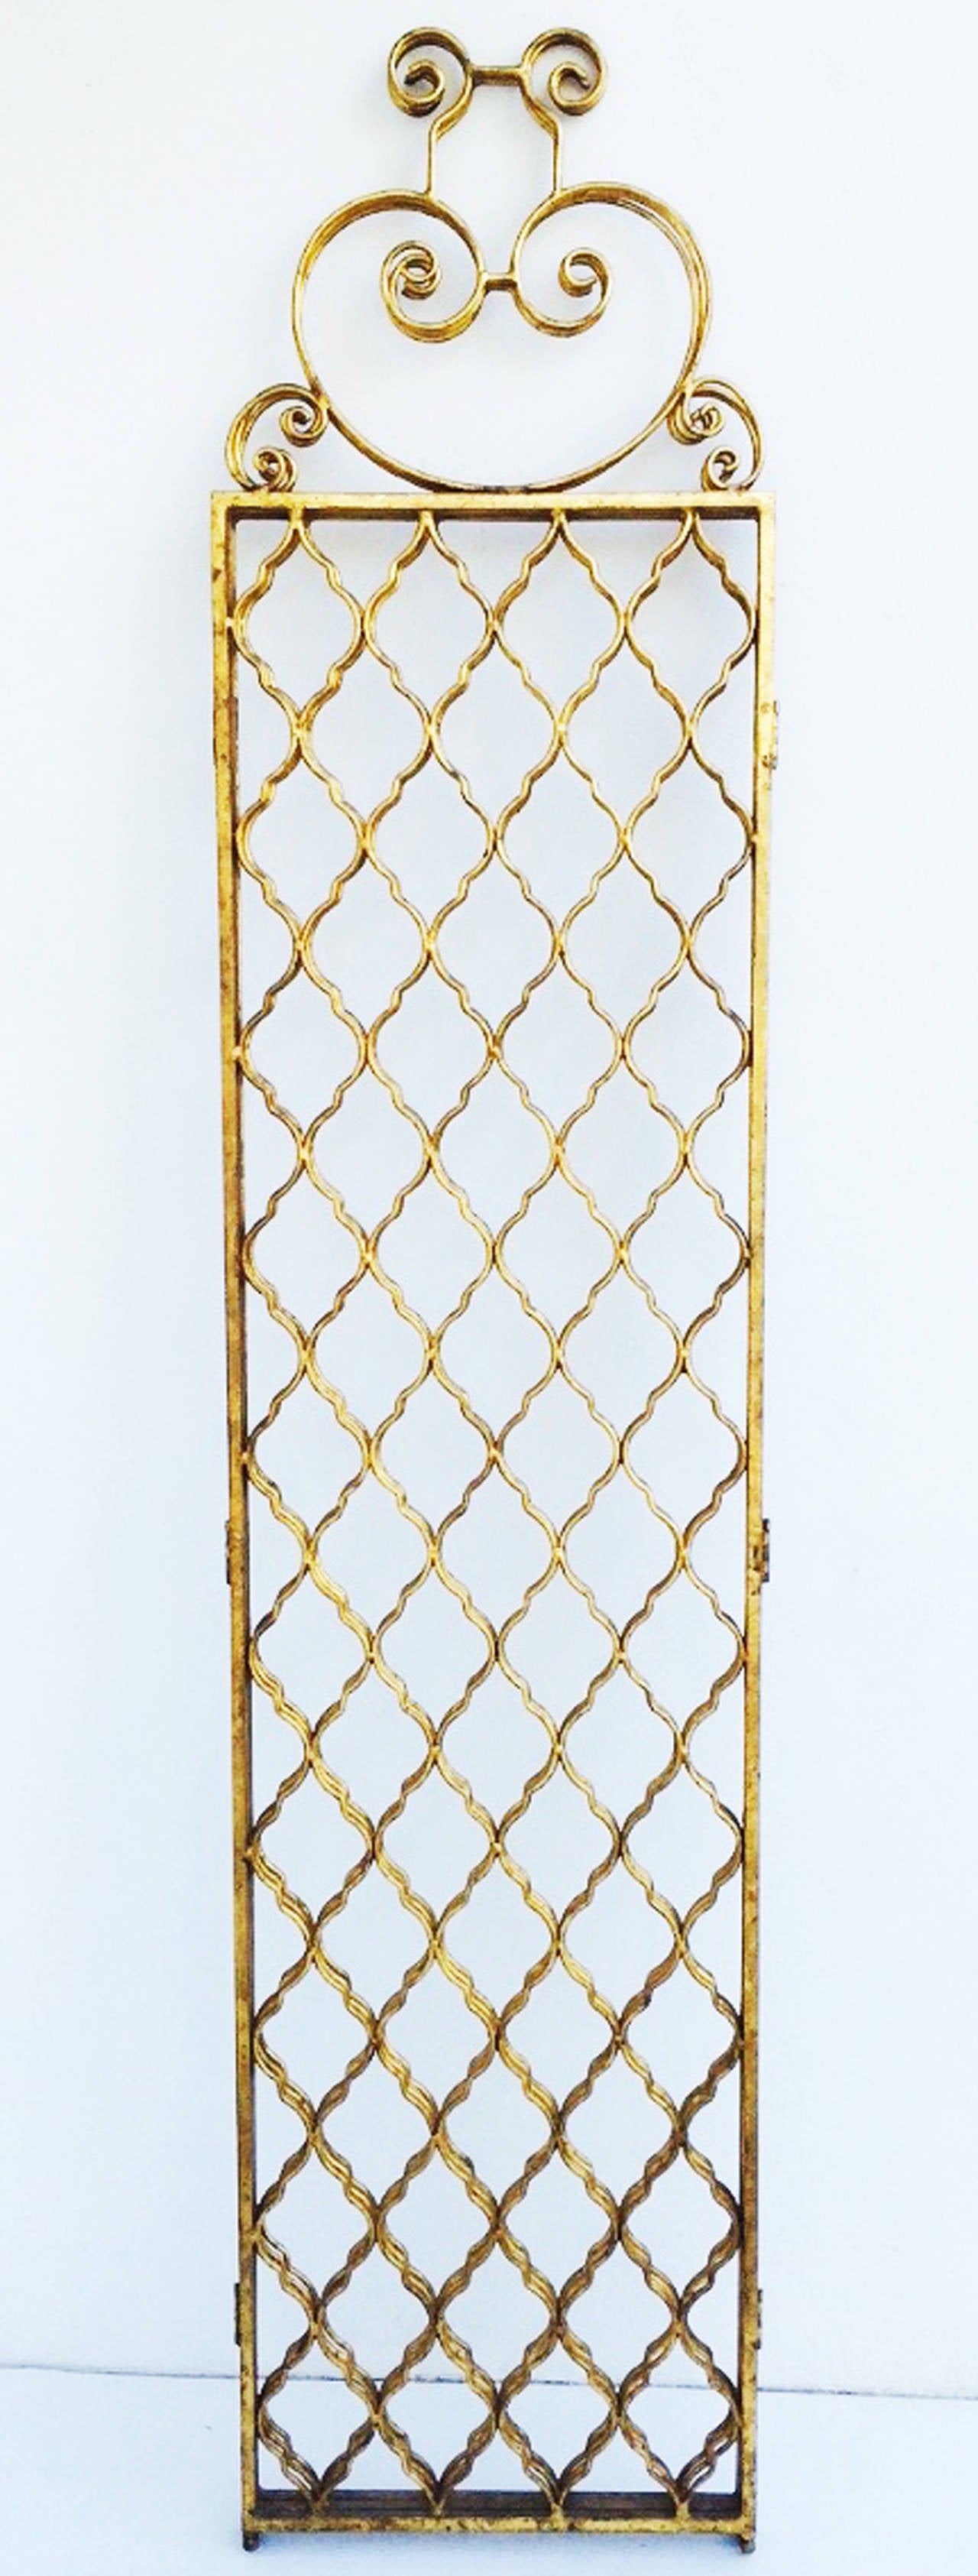 A chic vintage gilt metal folding screen/room divider. Authentic Italian gilt metal item features three hinged panels (76.5